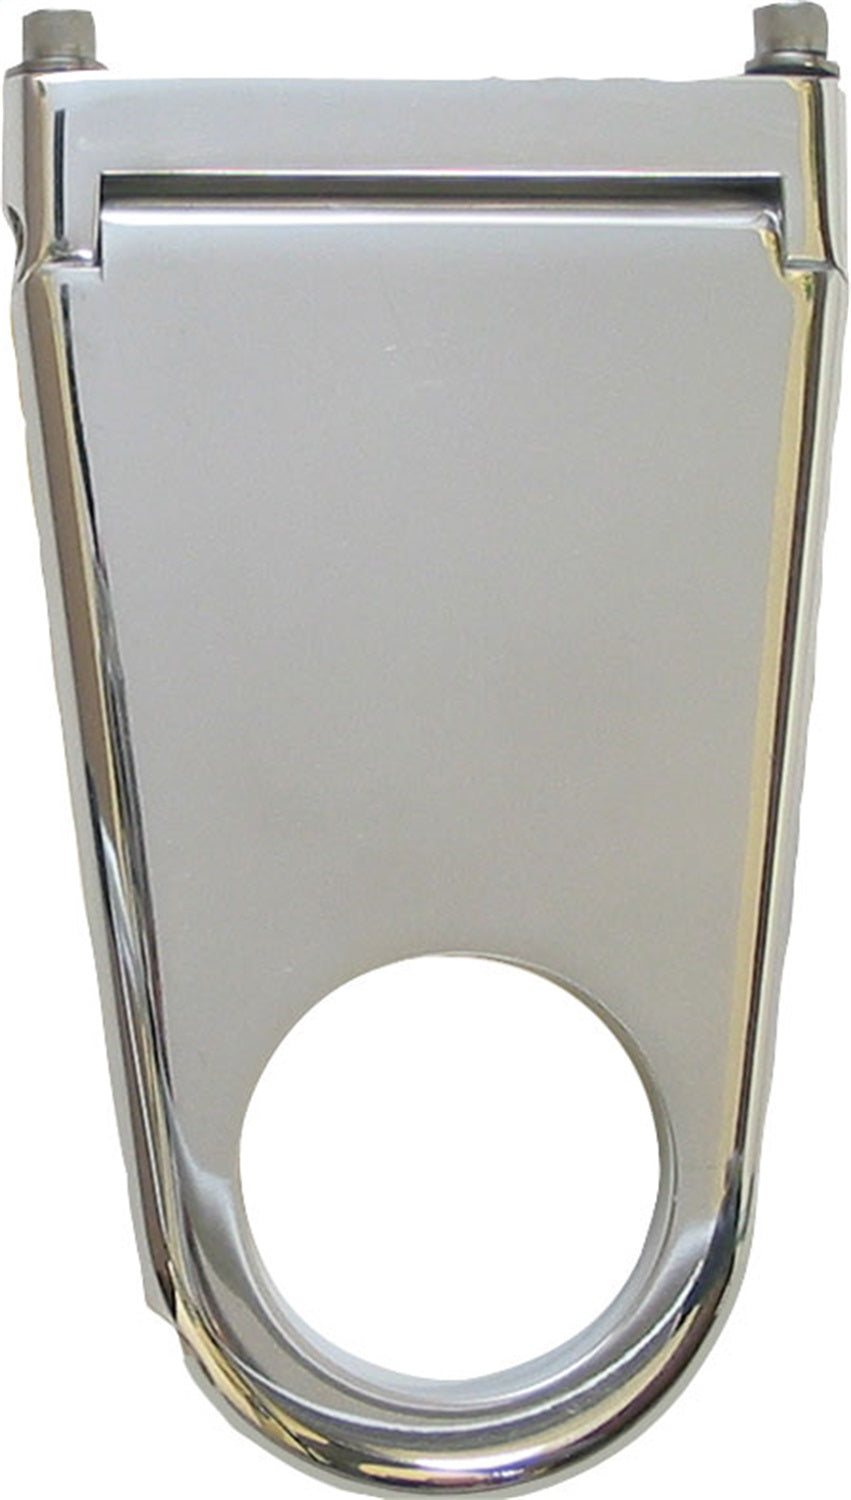 Borgeson Column Drop Blank Style 1-3/4in. Column X 3in. Drop Polished Aluminum 911173